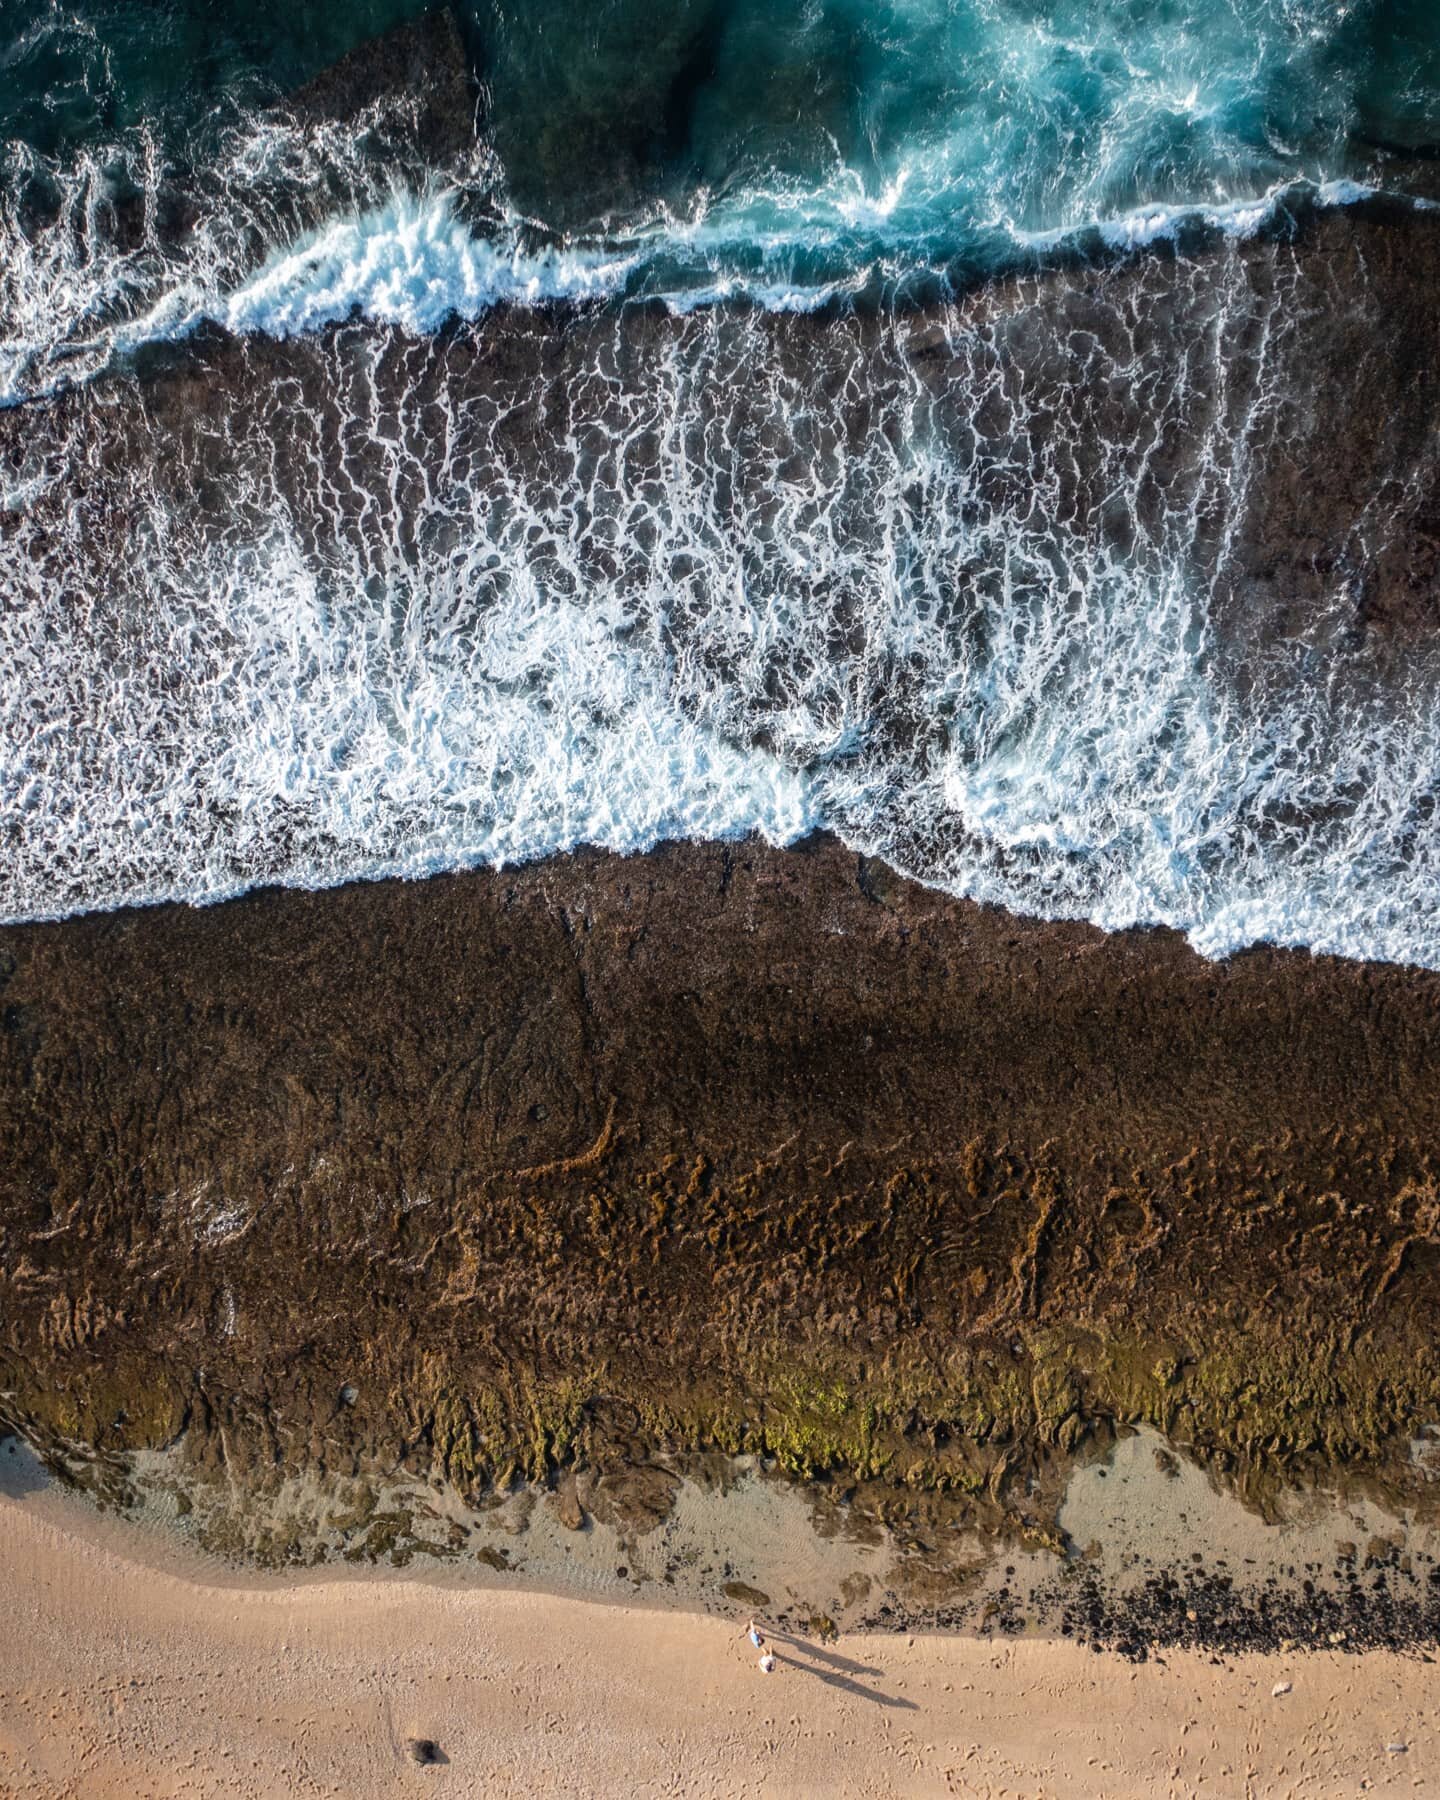 Onlookers.

#maui #hawaii #luckywelivehawaii #ocean #beach #producer #waves #drone #abovetheclouds #dronestagram #droneshots #dronephoto #perspective #hnnsunrise